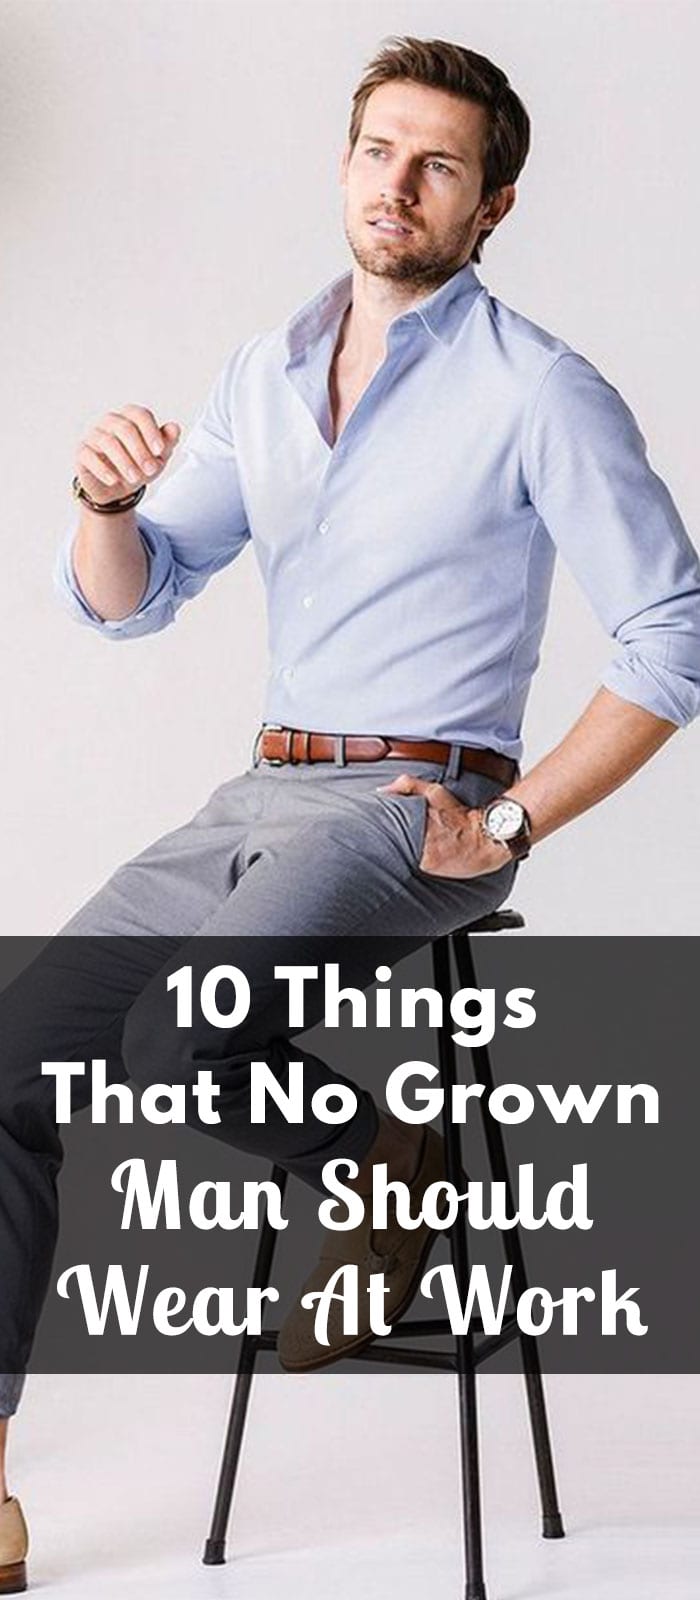 10 Things That No Grown Man Should Wear At Work